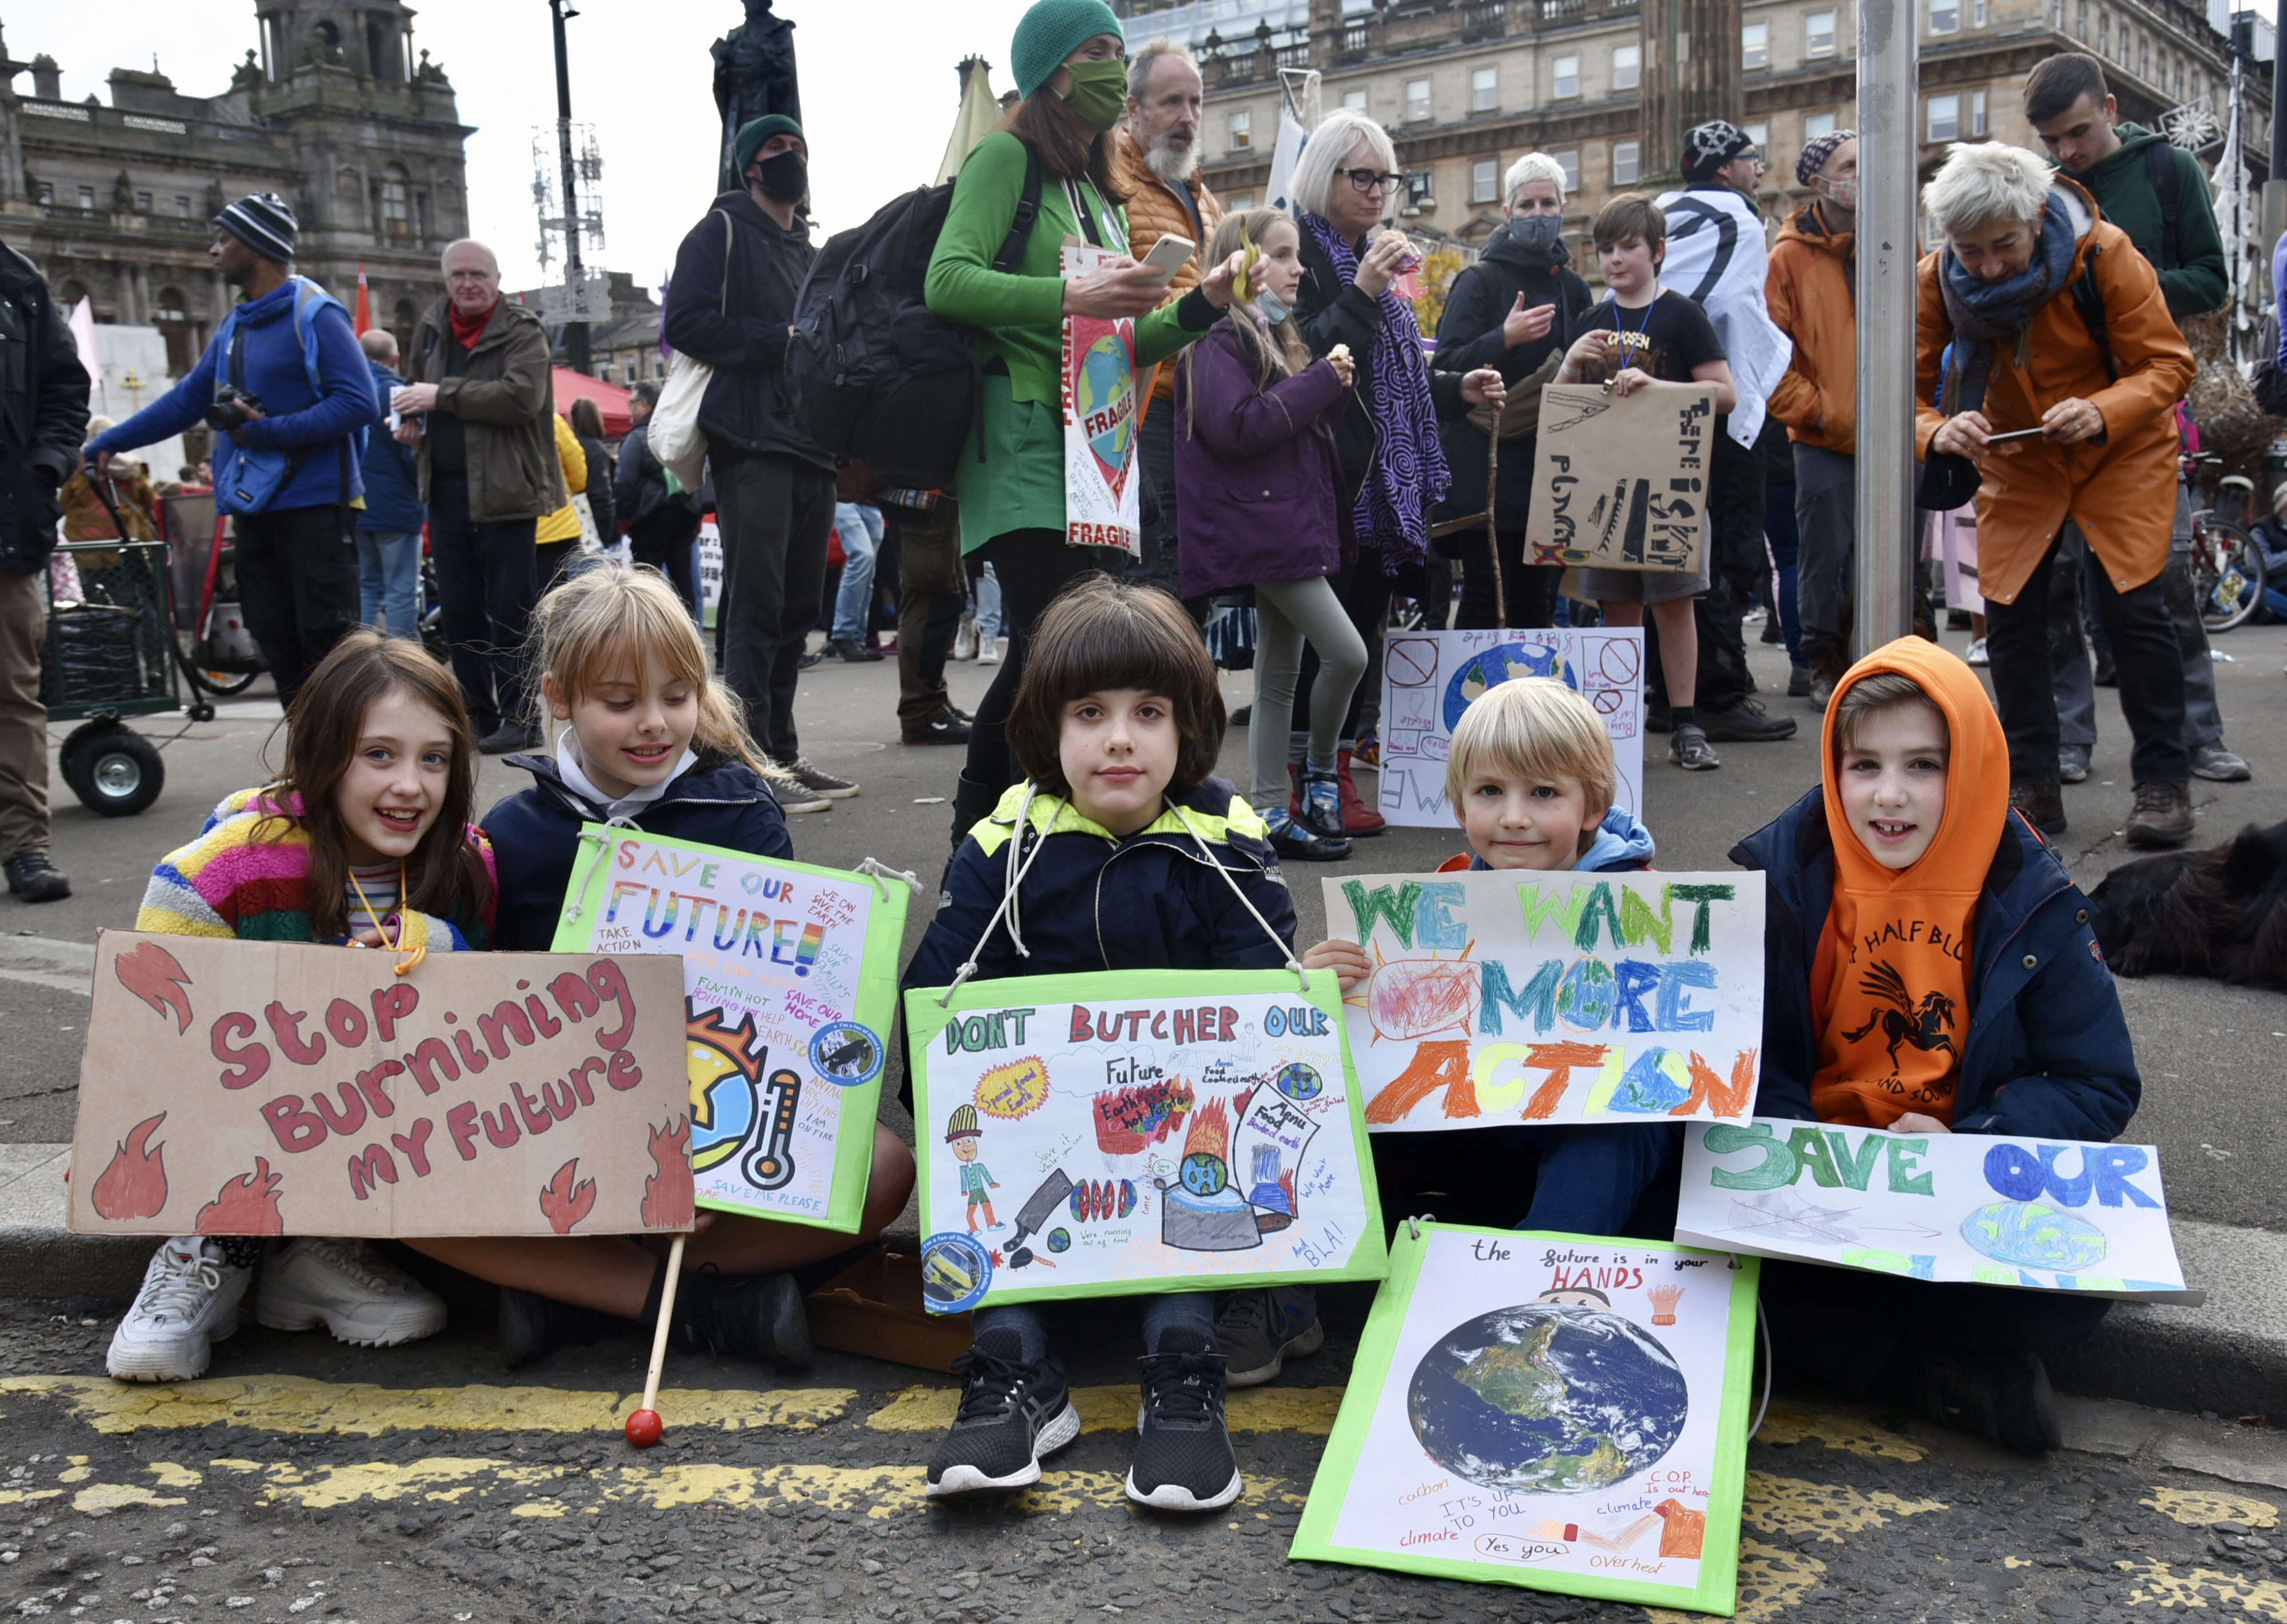 Many young climate activists in Glasgow were missing a day of school to attend the protest.